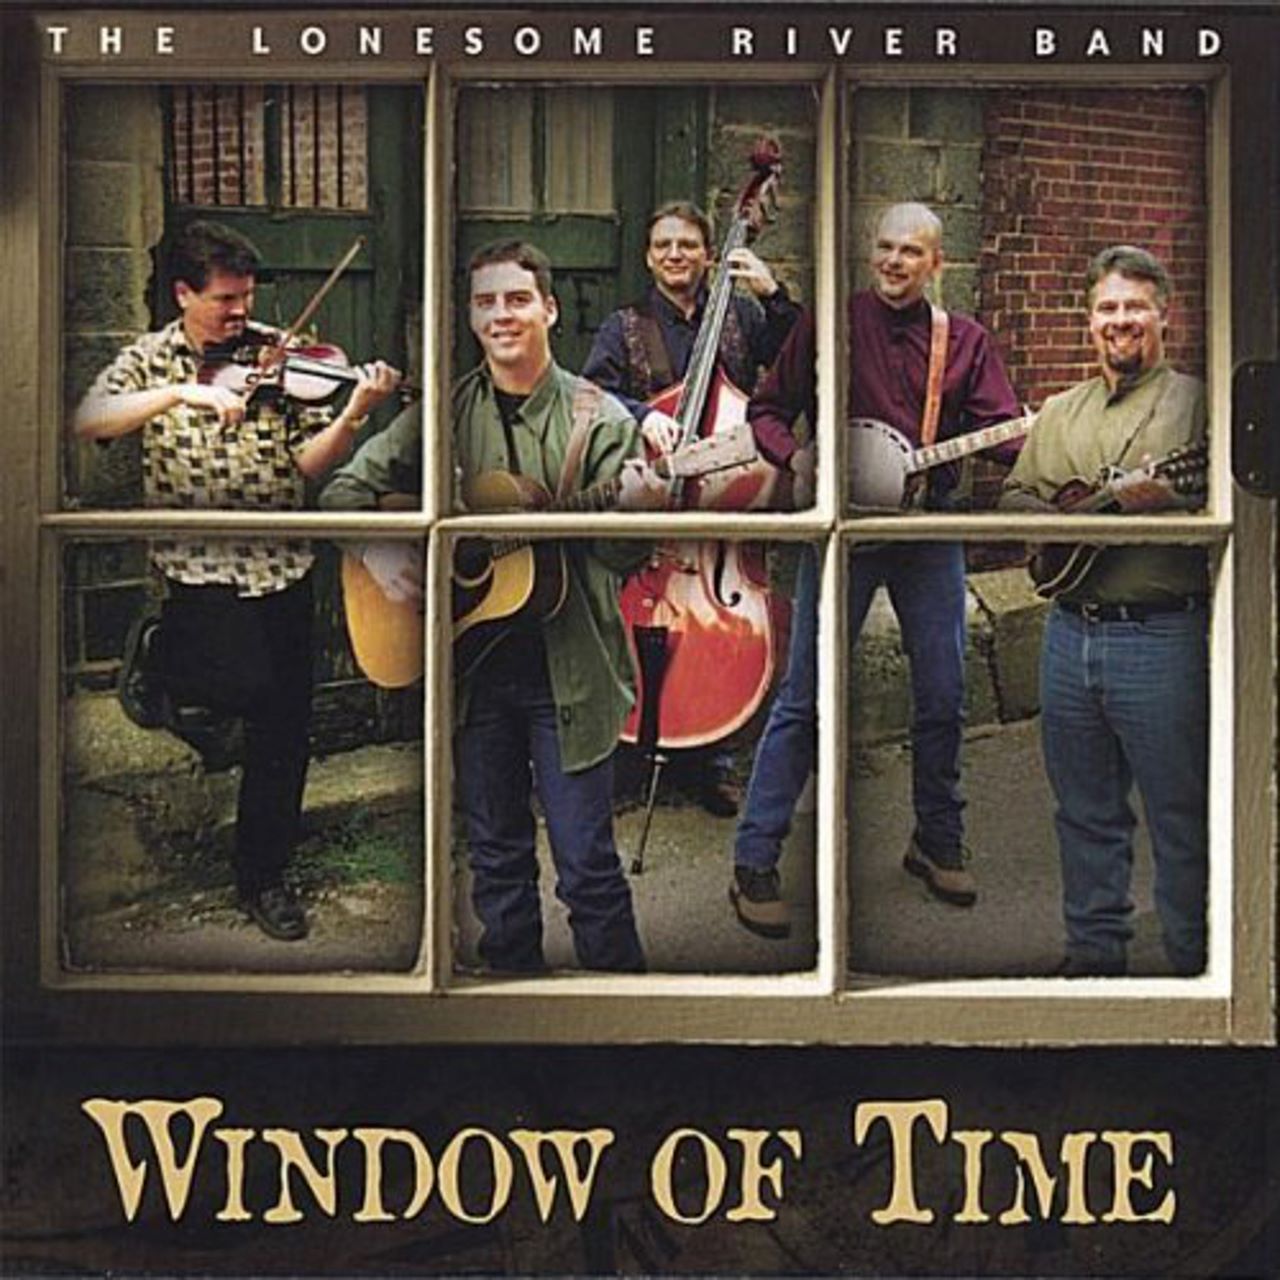 Lonesome River Band - Window Of Time cover album